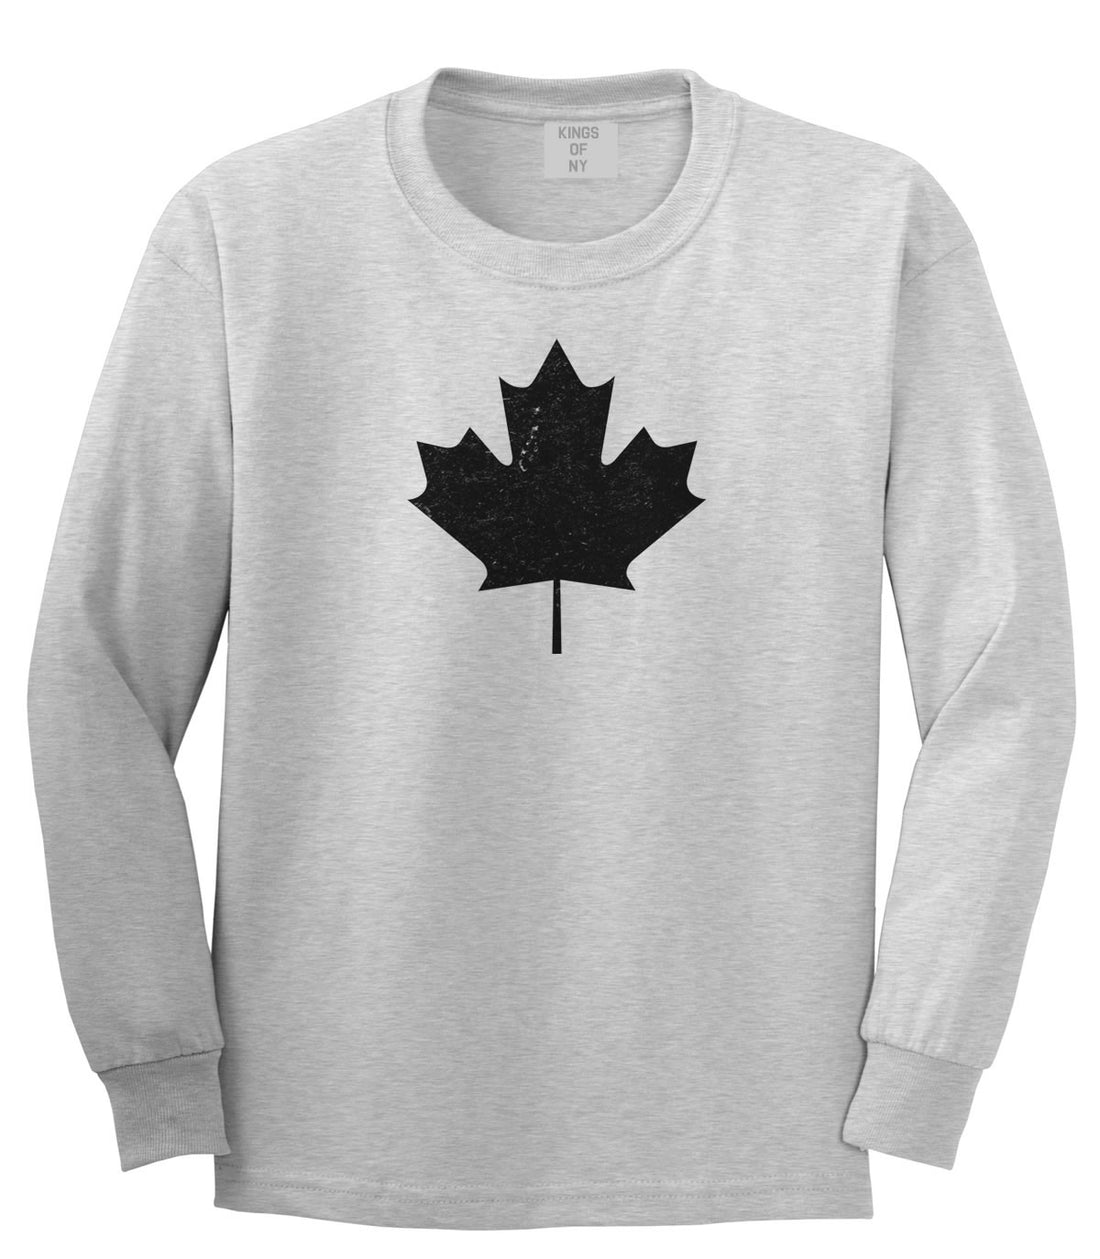 Maple Leaf Long Sleeve T-Shirt by Kings Of NY